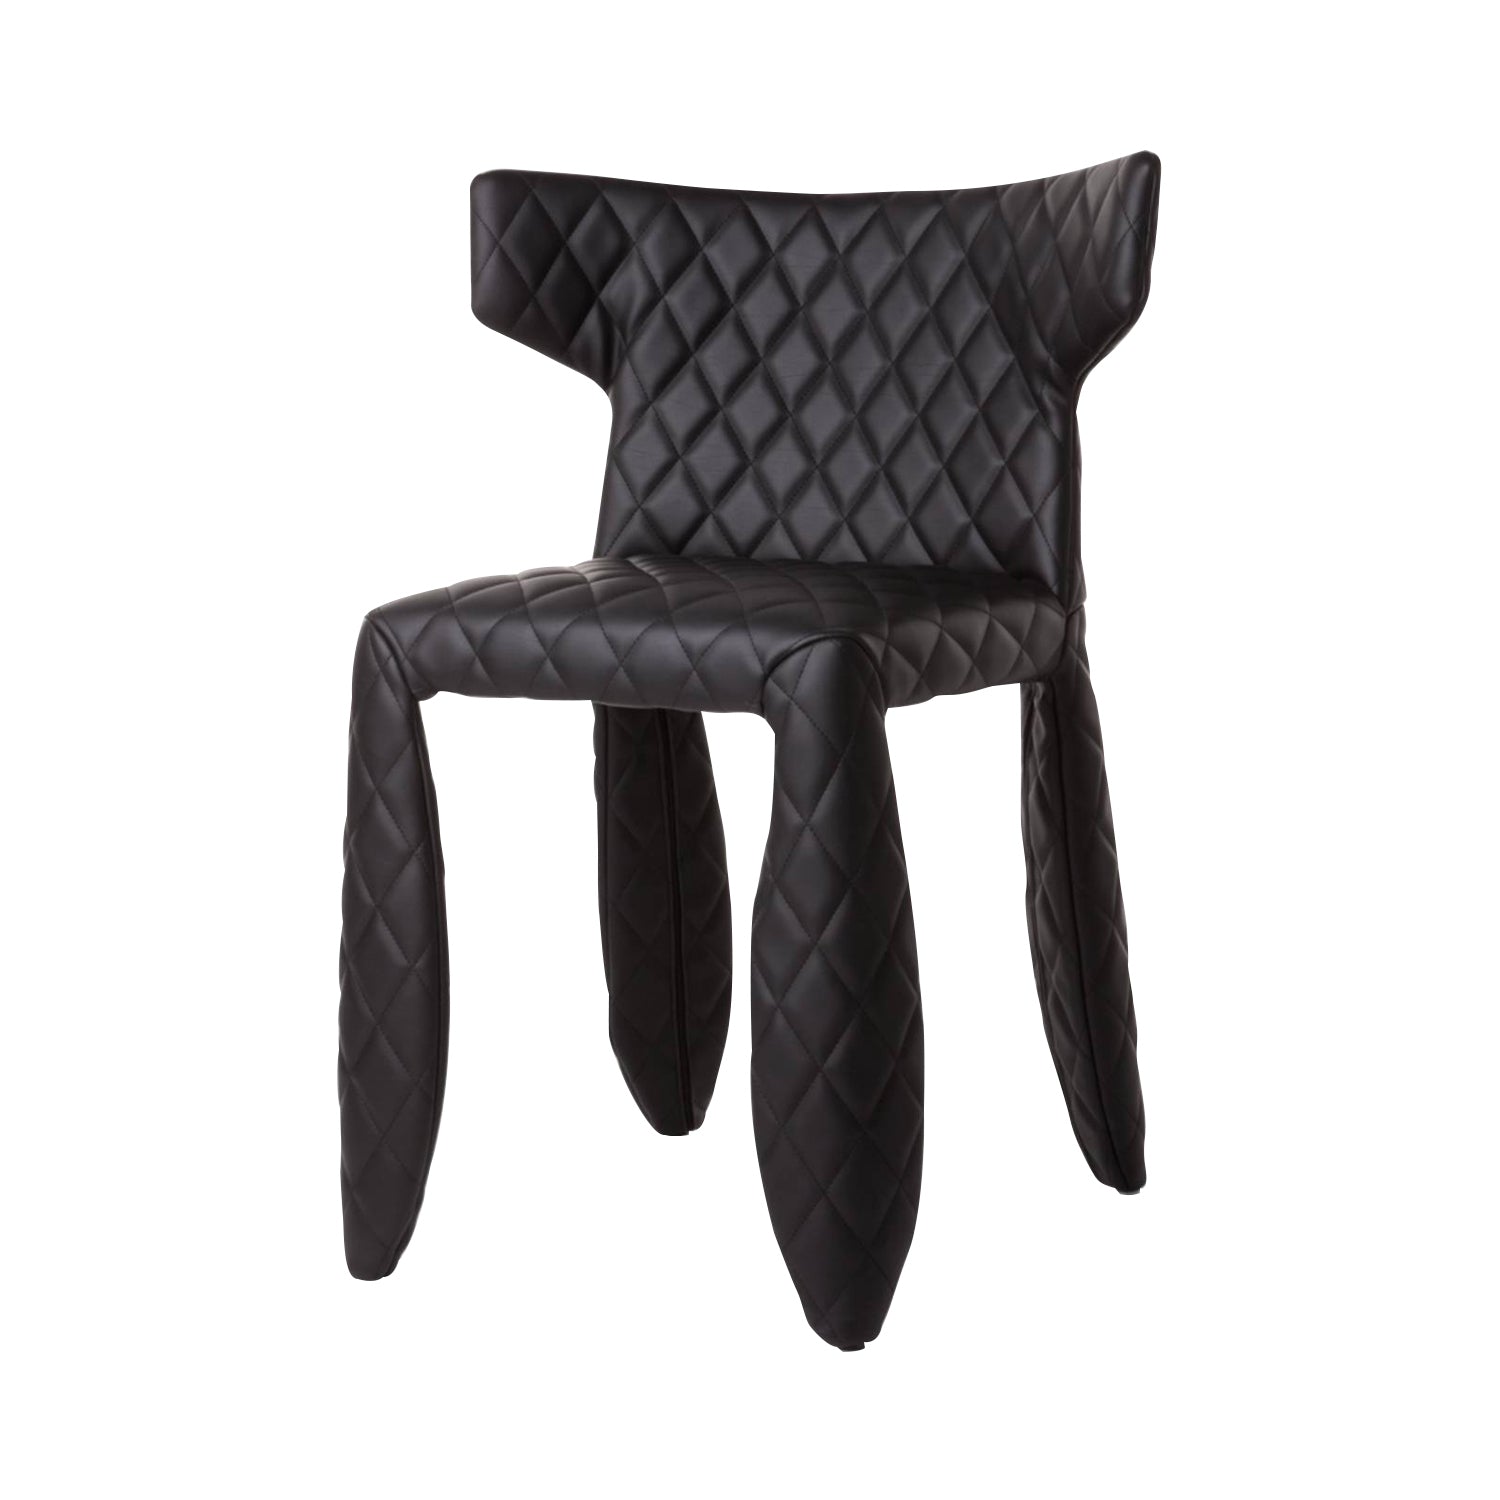 Monster Chair: Black + With Arms + Without Embroidery